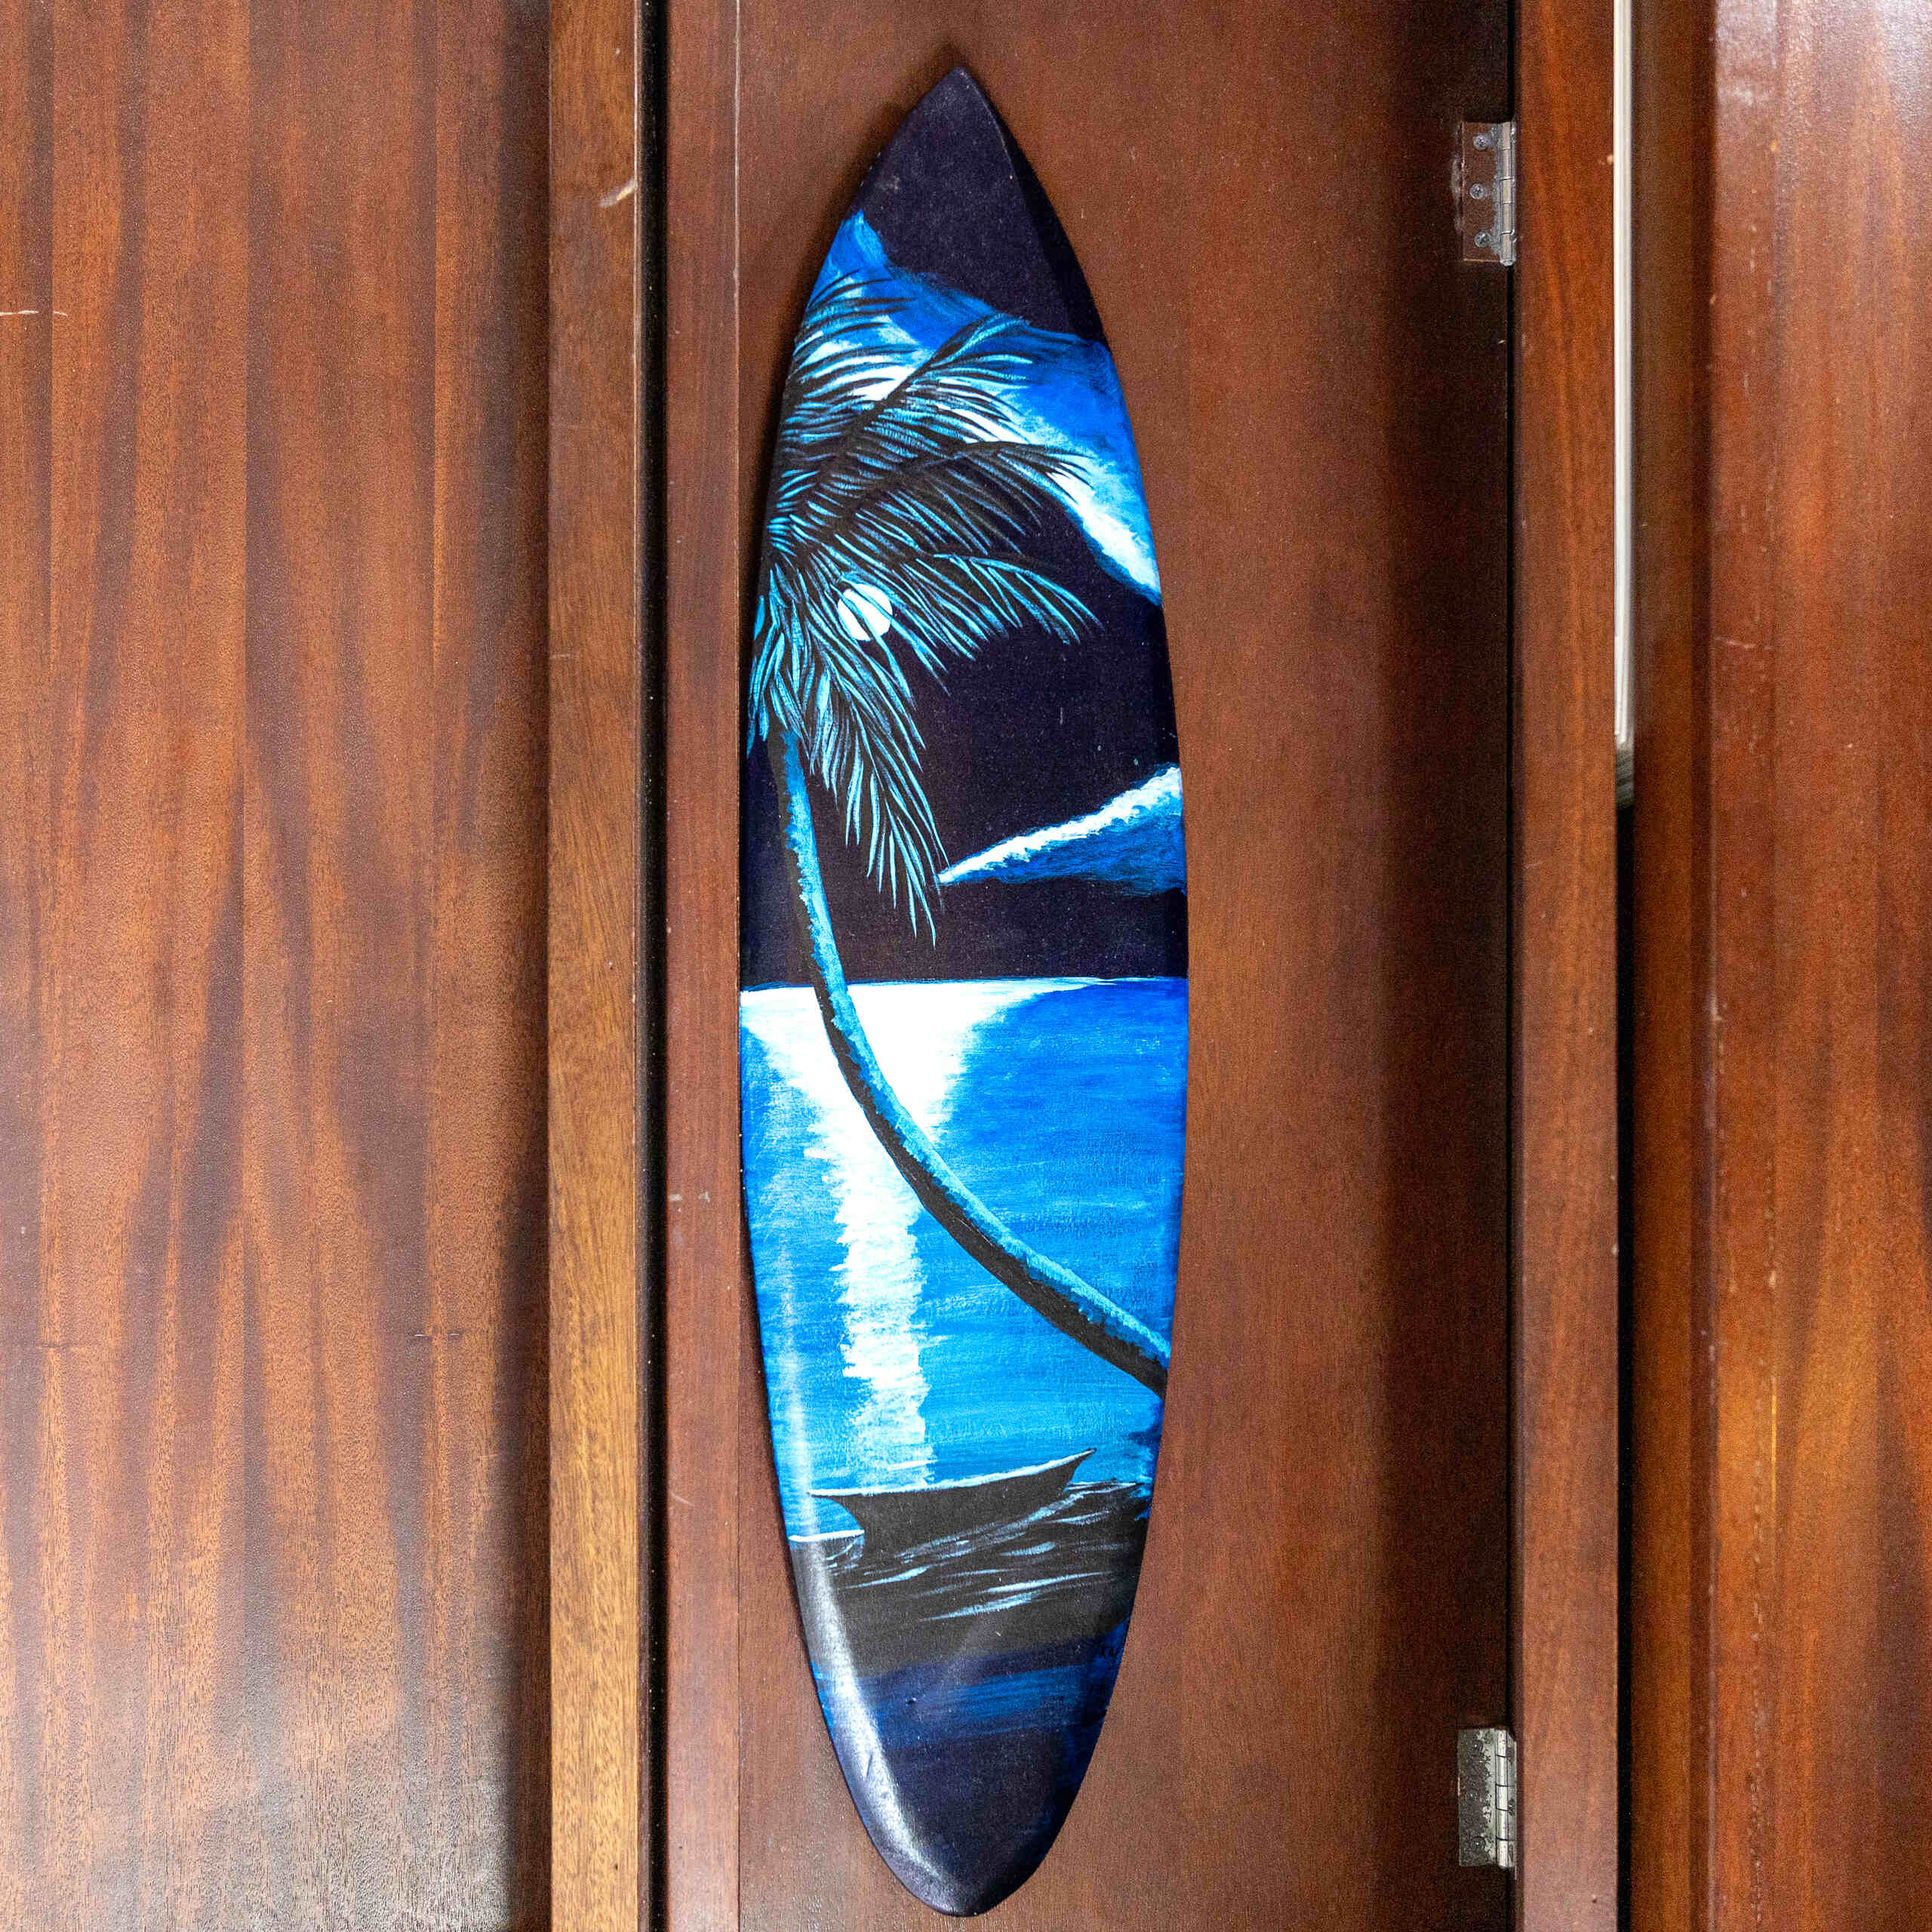 Painted surfing board